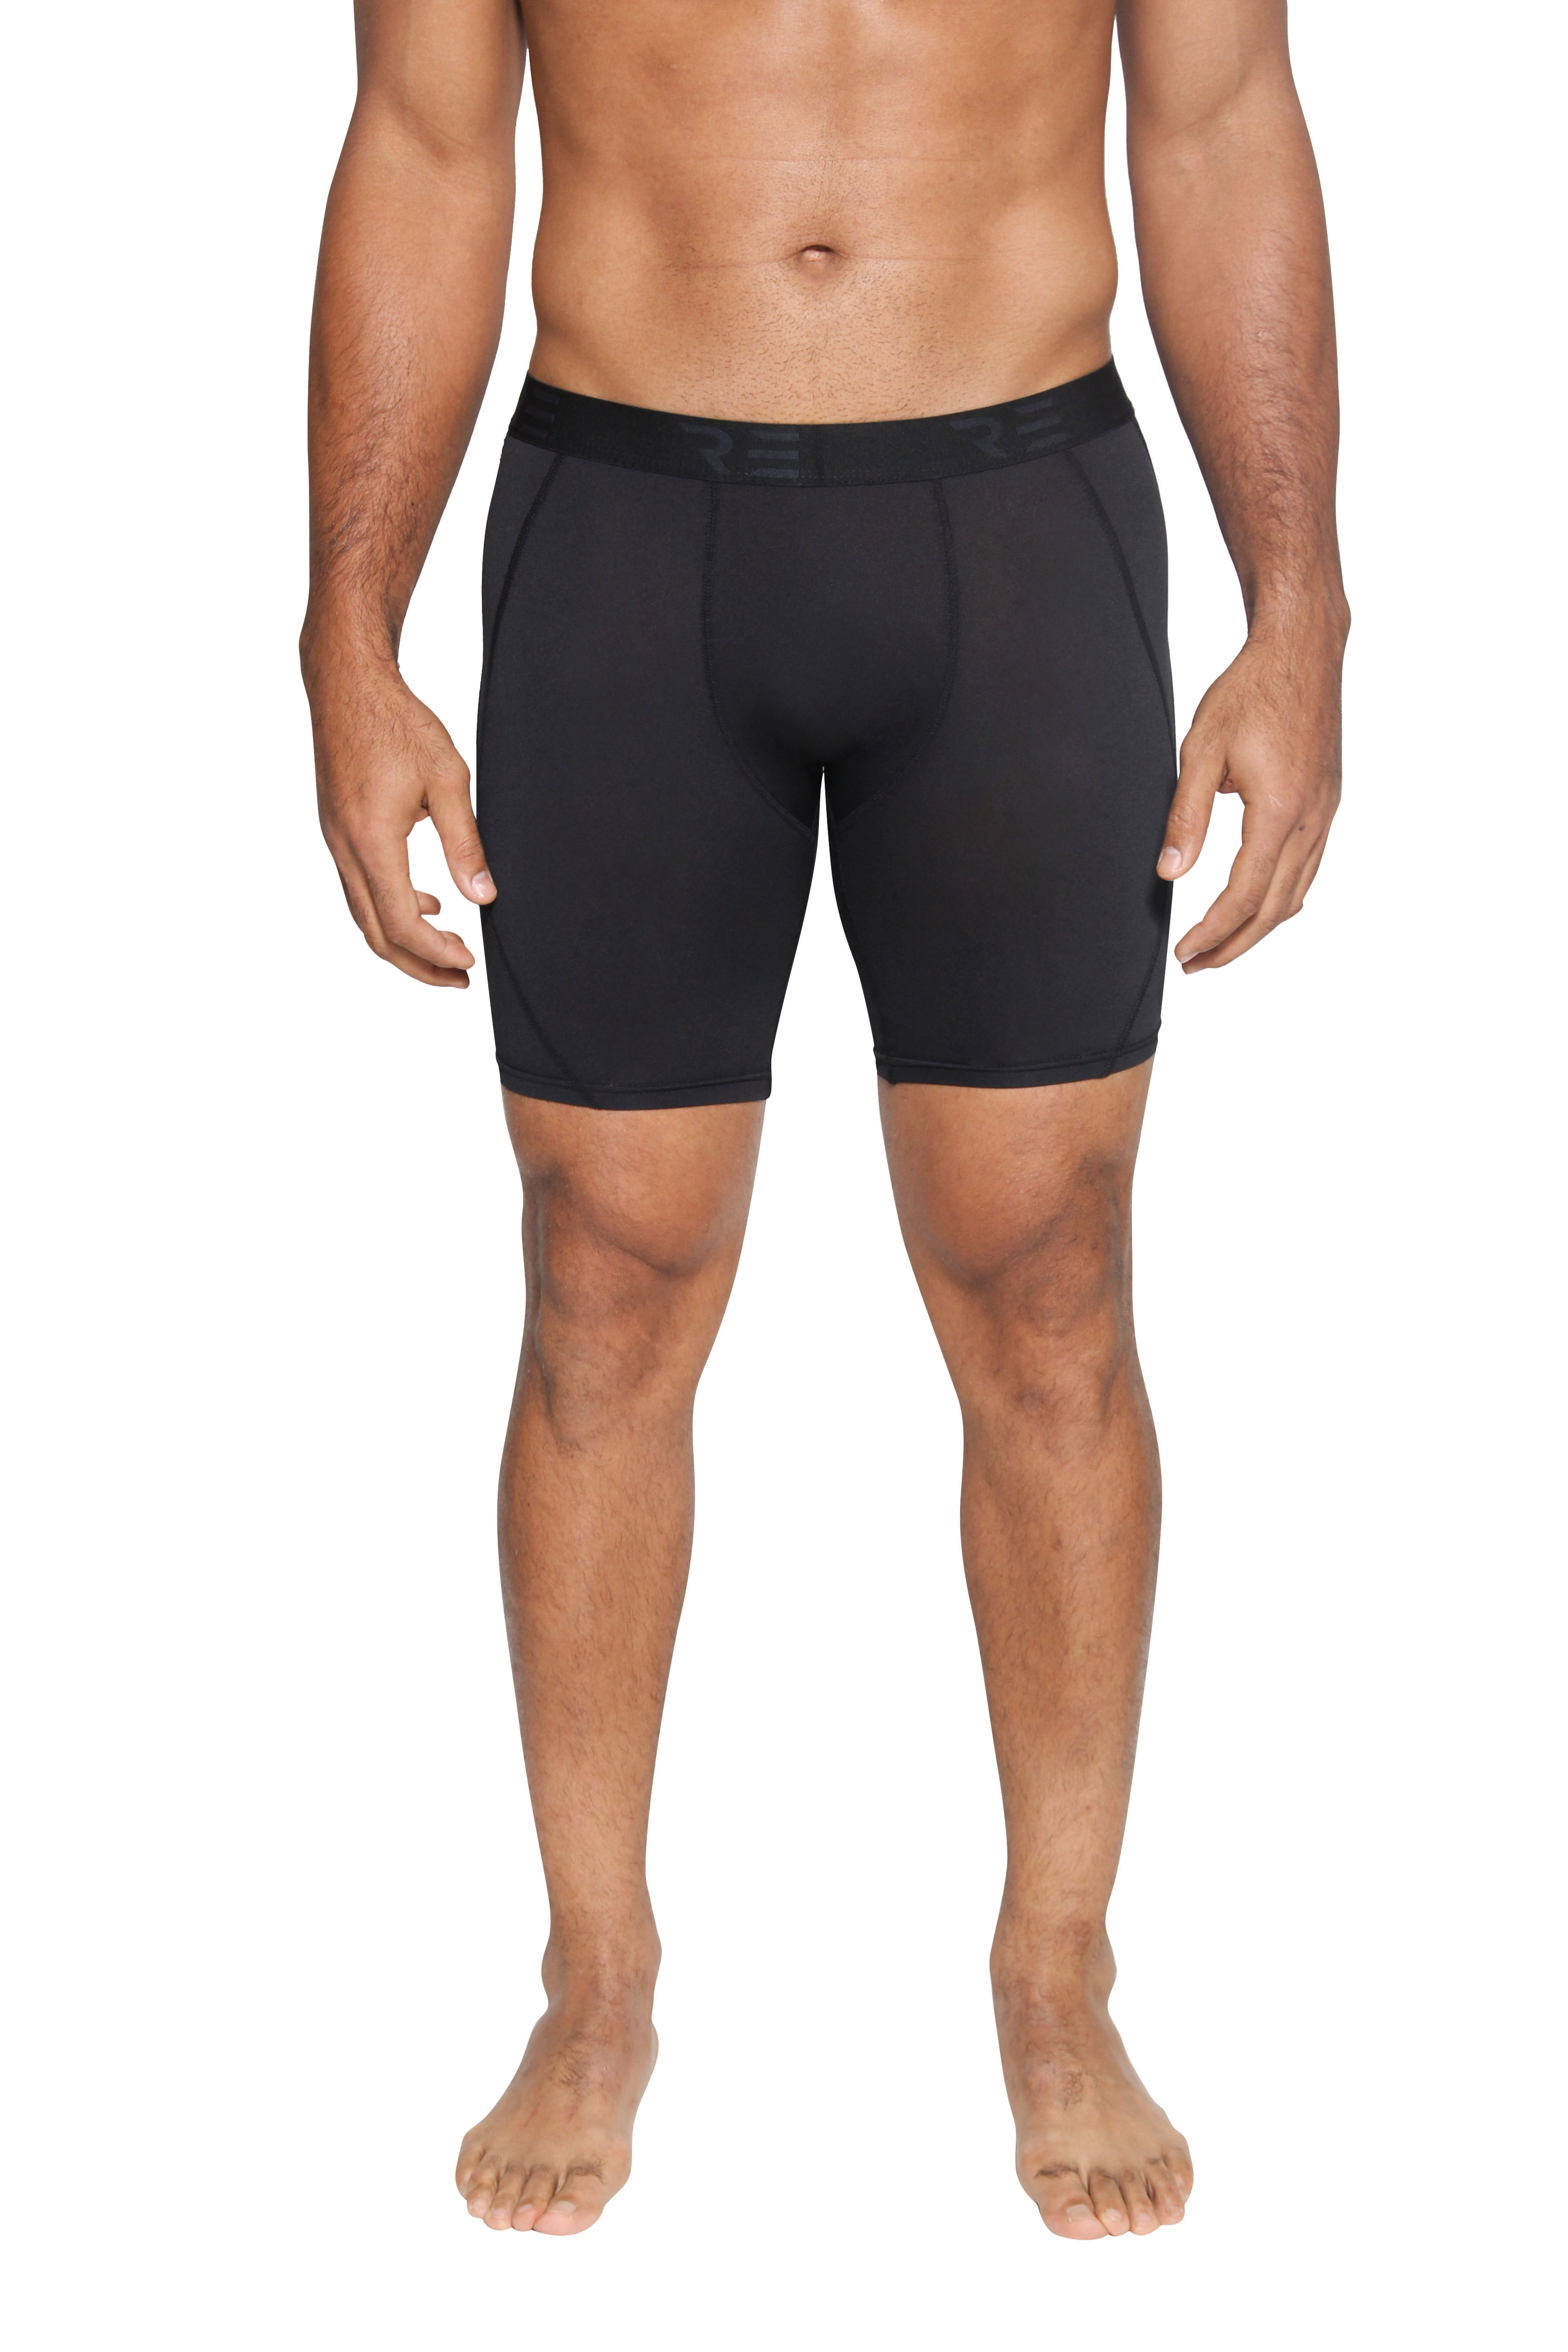 5 Pack Mens Compression Shorts Men Quick Dry Performance Athletic Shorts